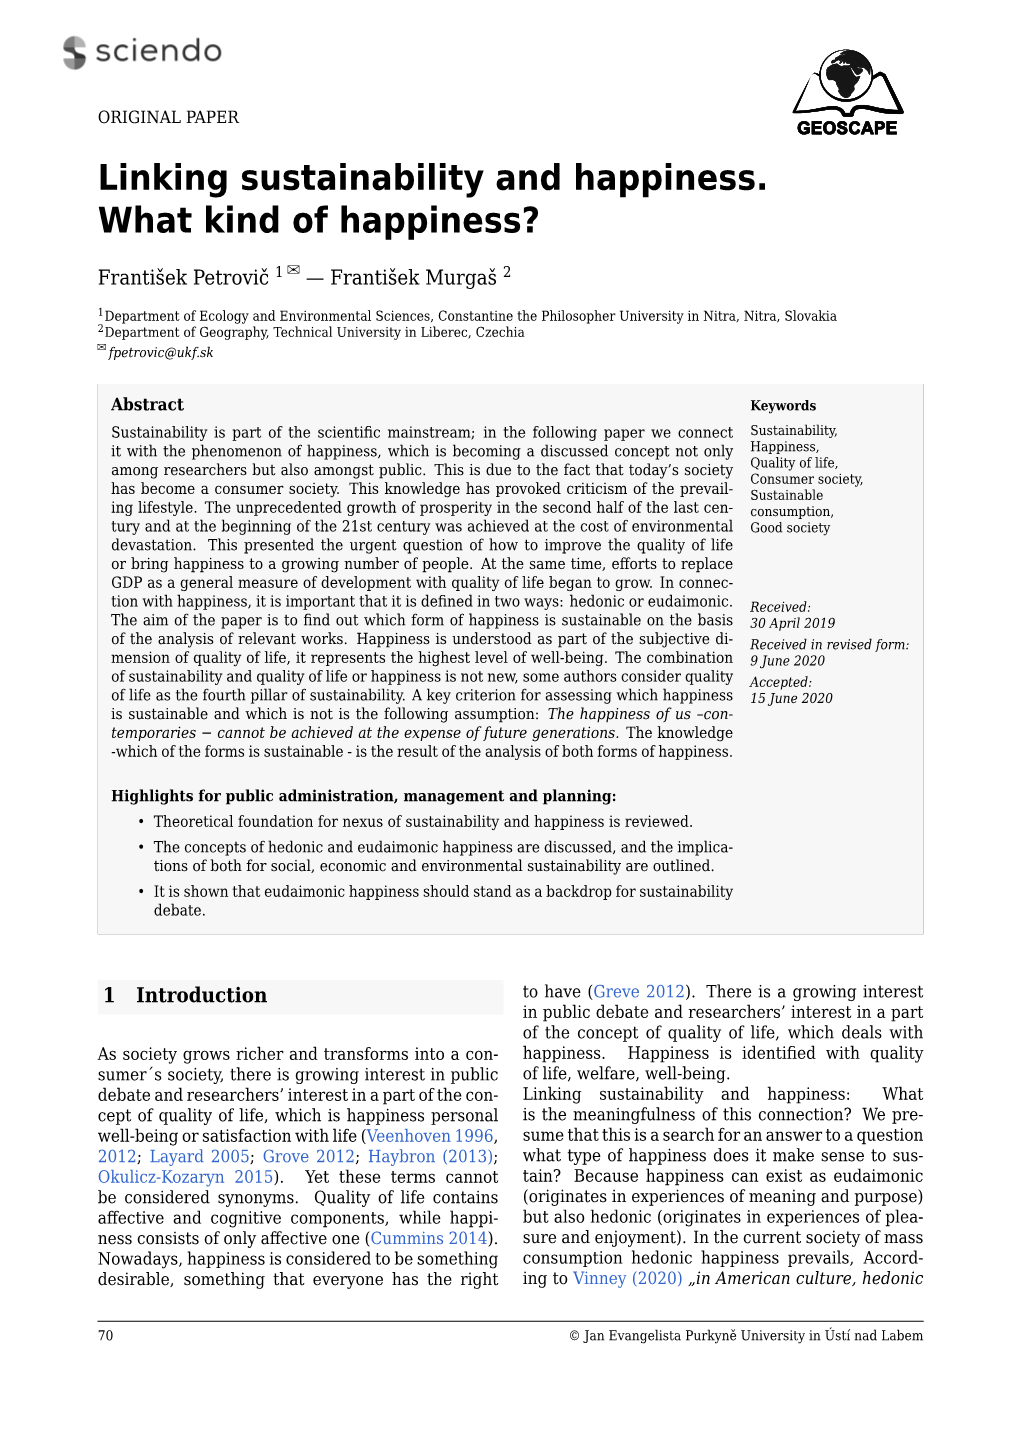 Linking Sustainability and Happiness. What Kind of Happiness?